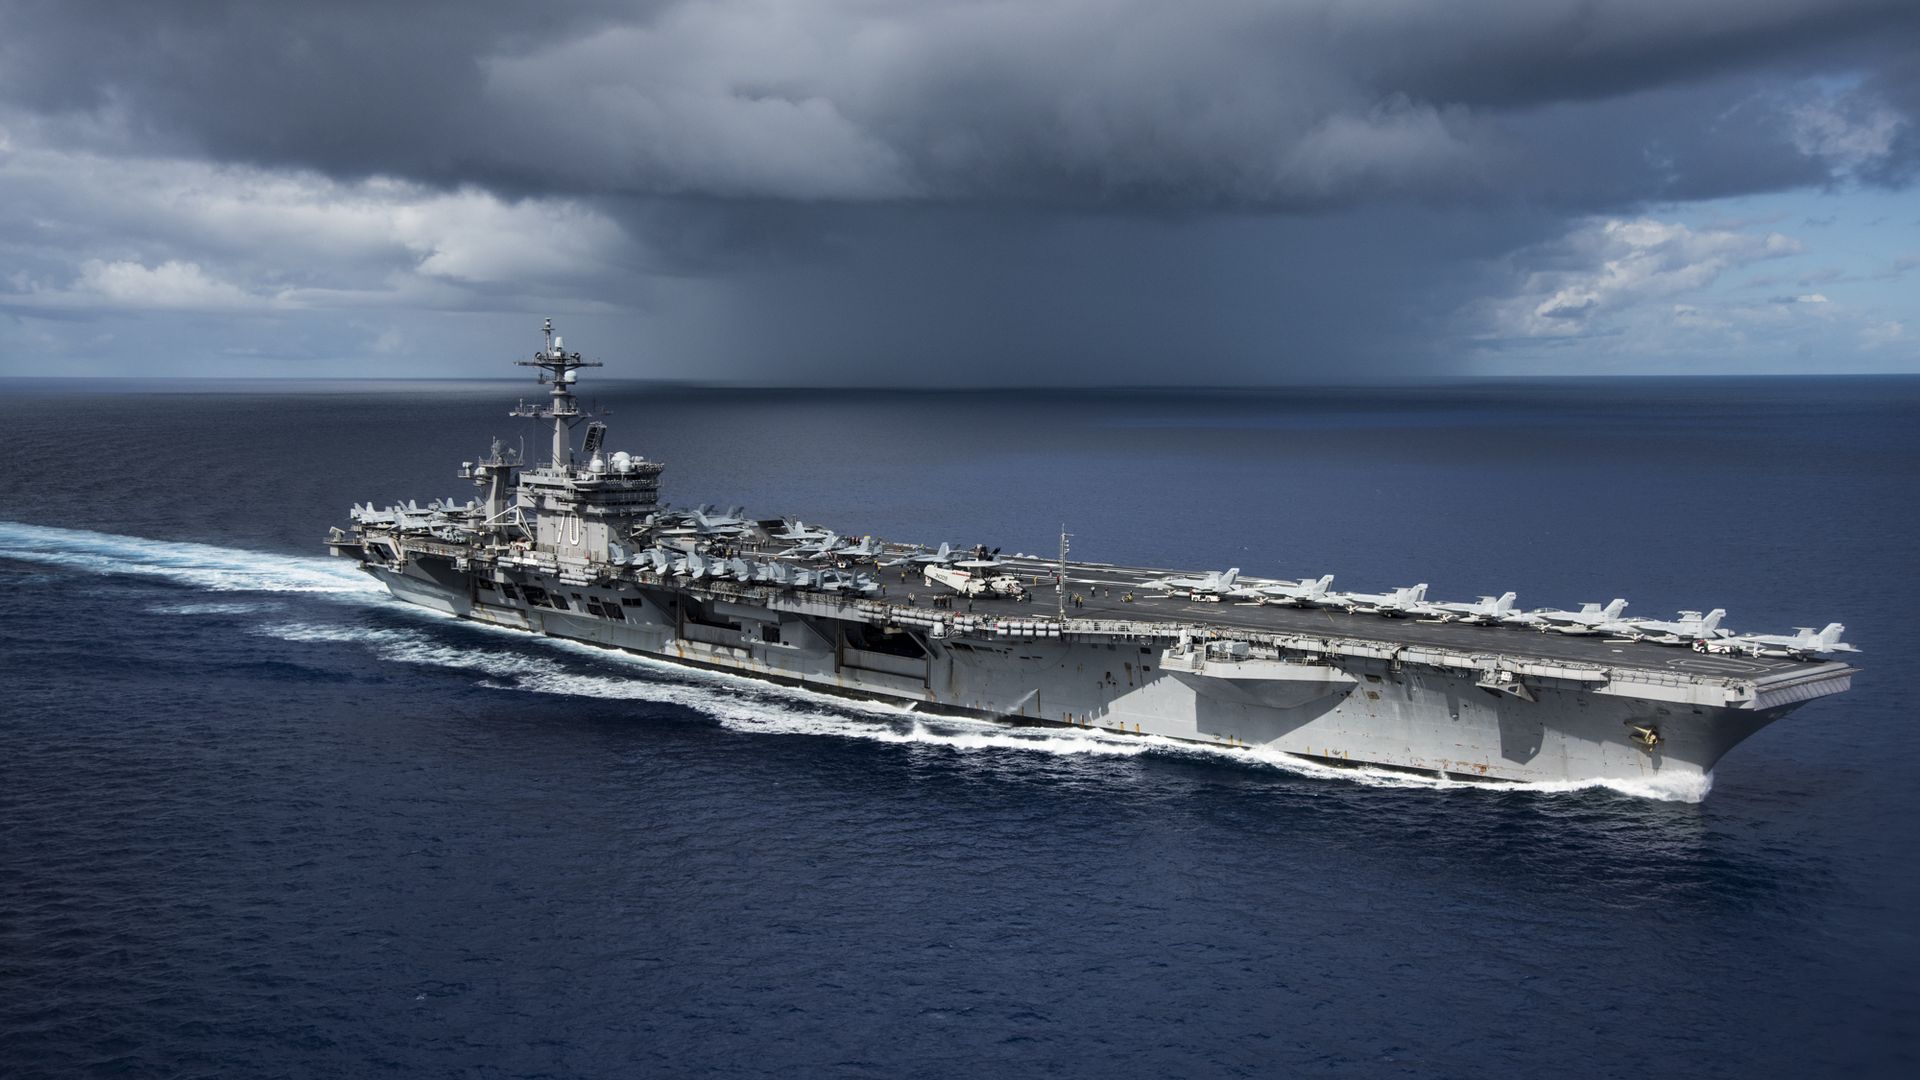 U.S. Navy aircraft carrier in the Pacific Ocean